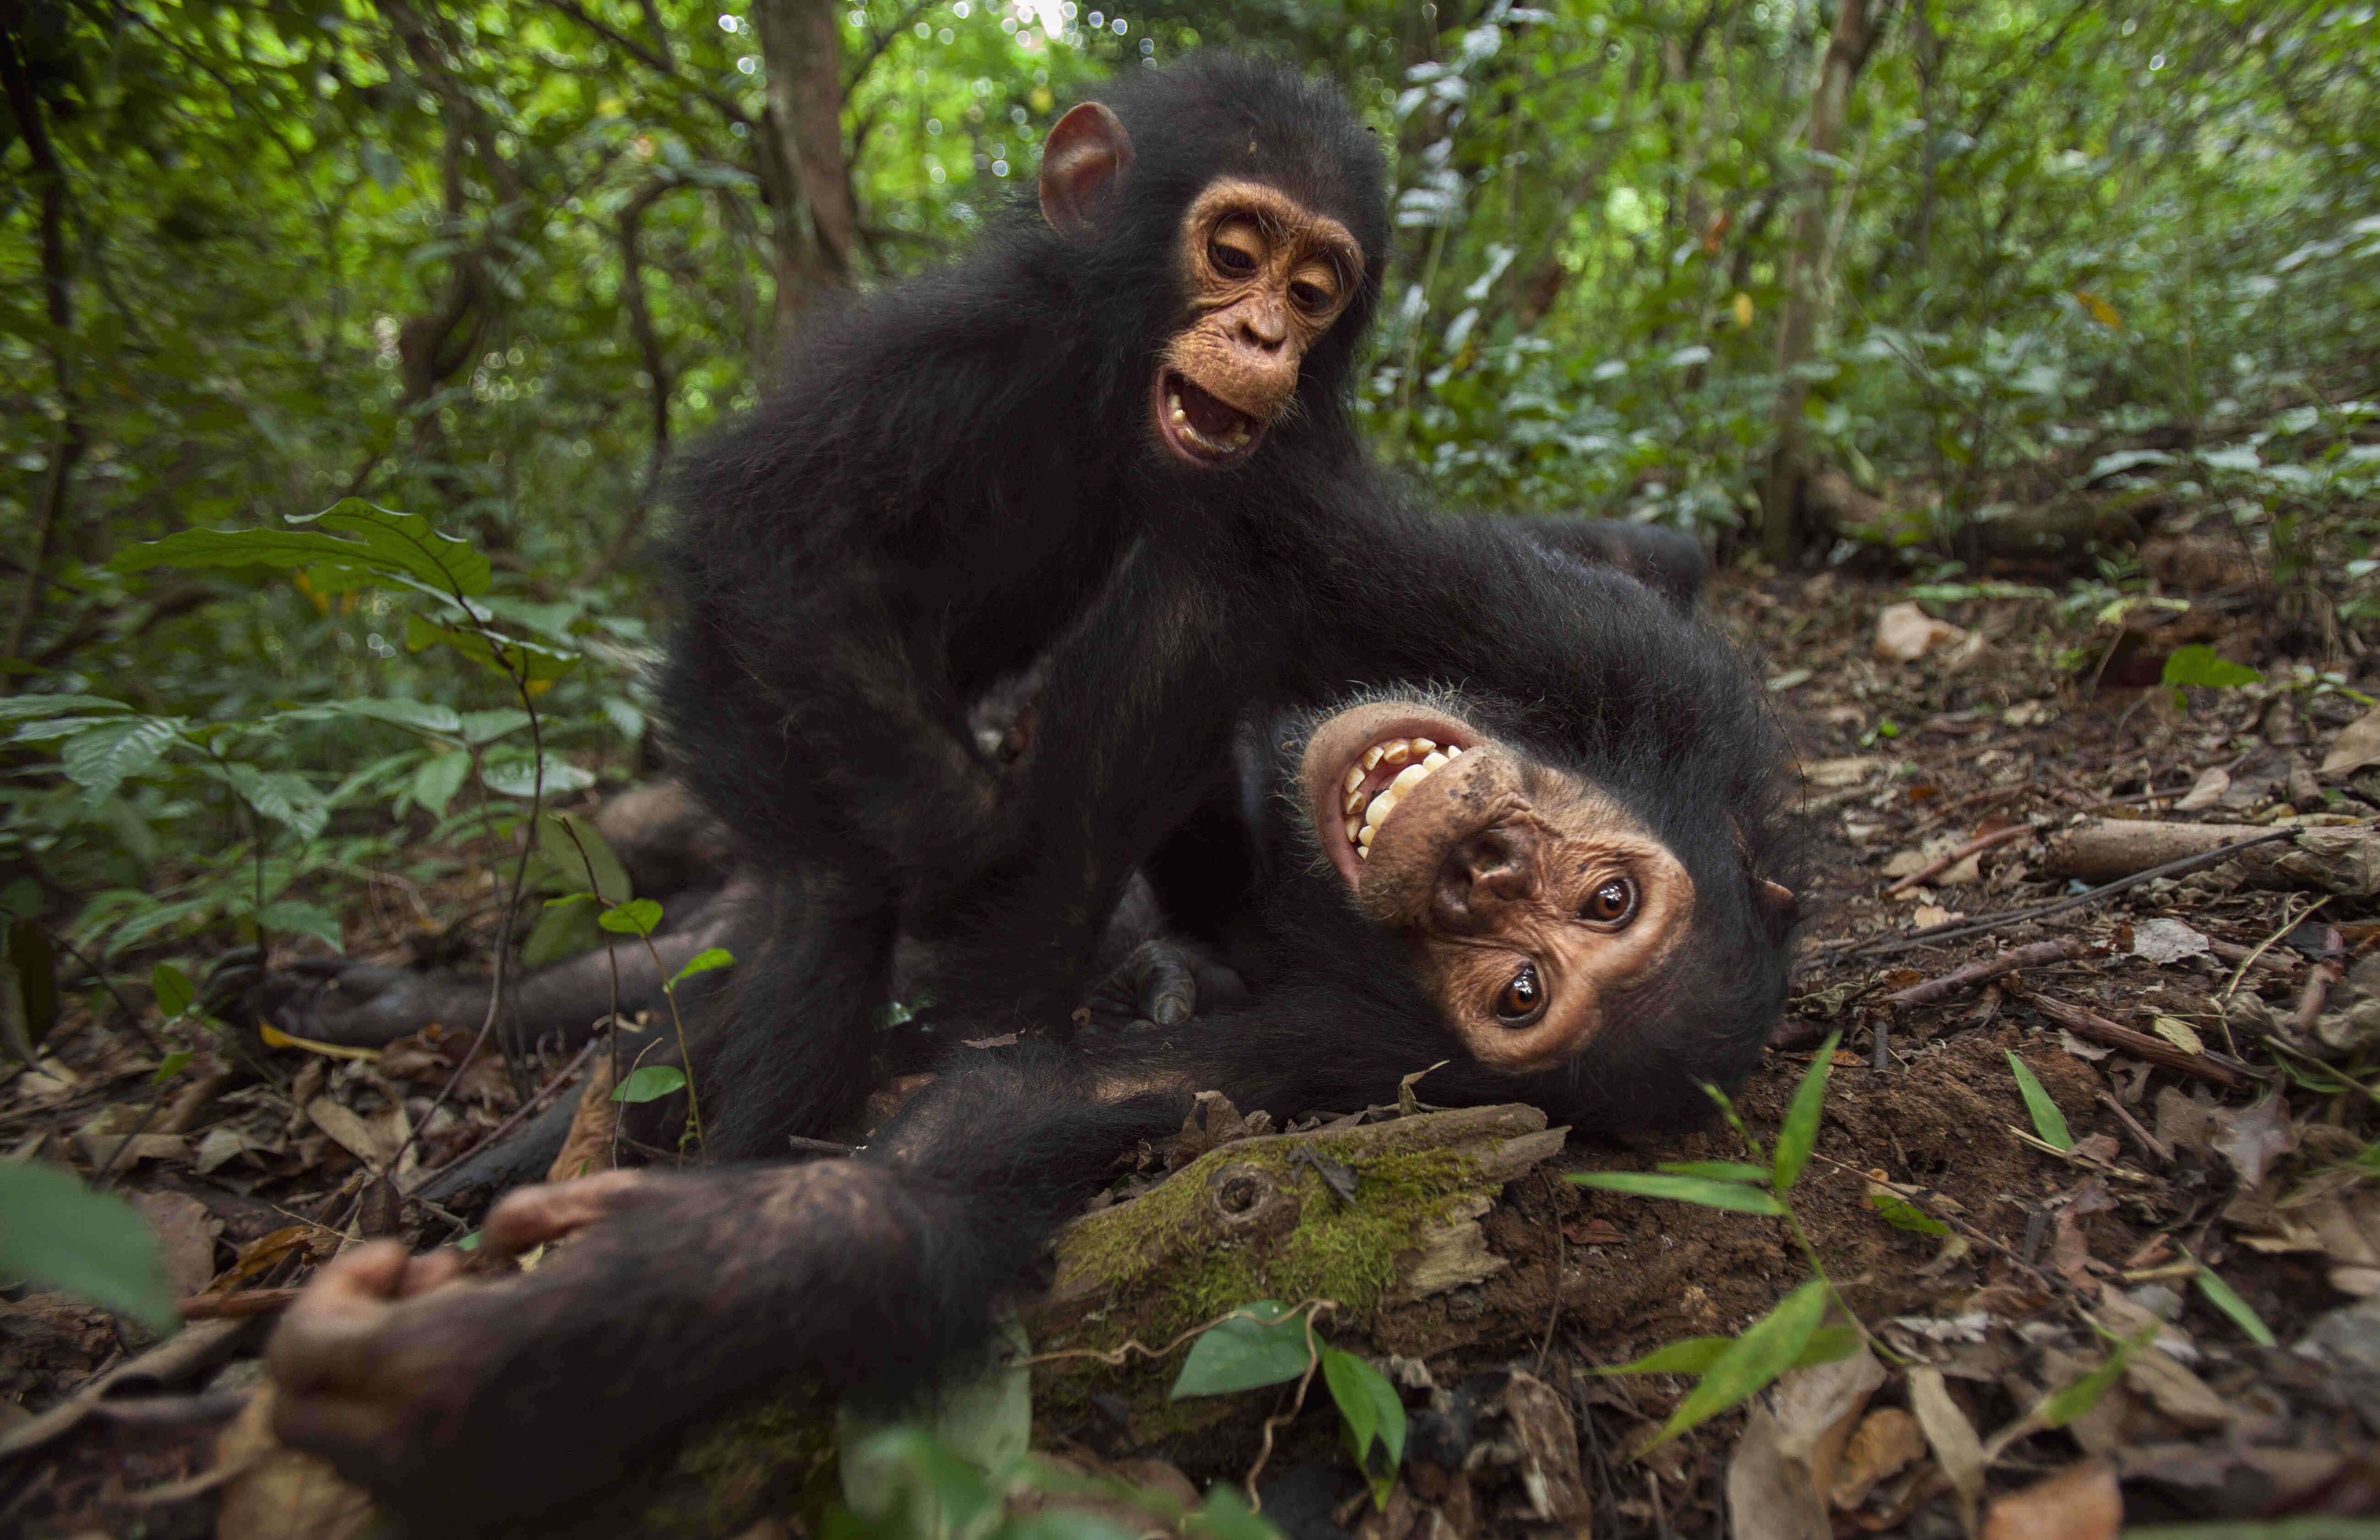 Two chimps playing together.